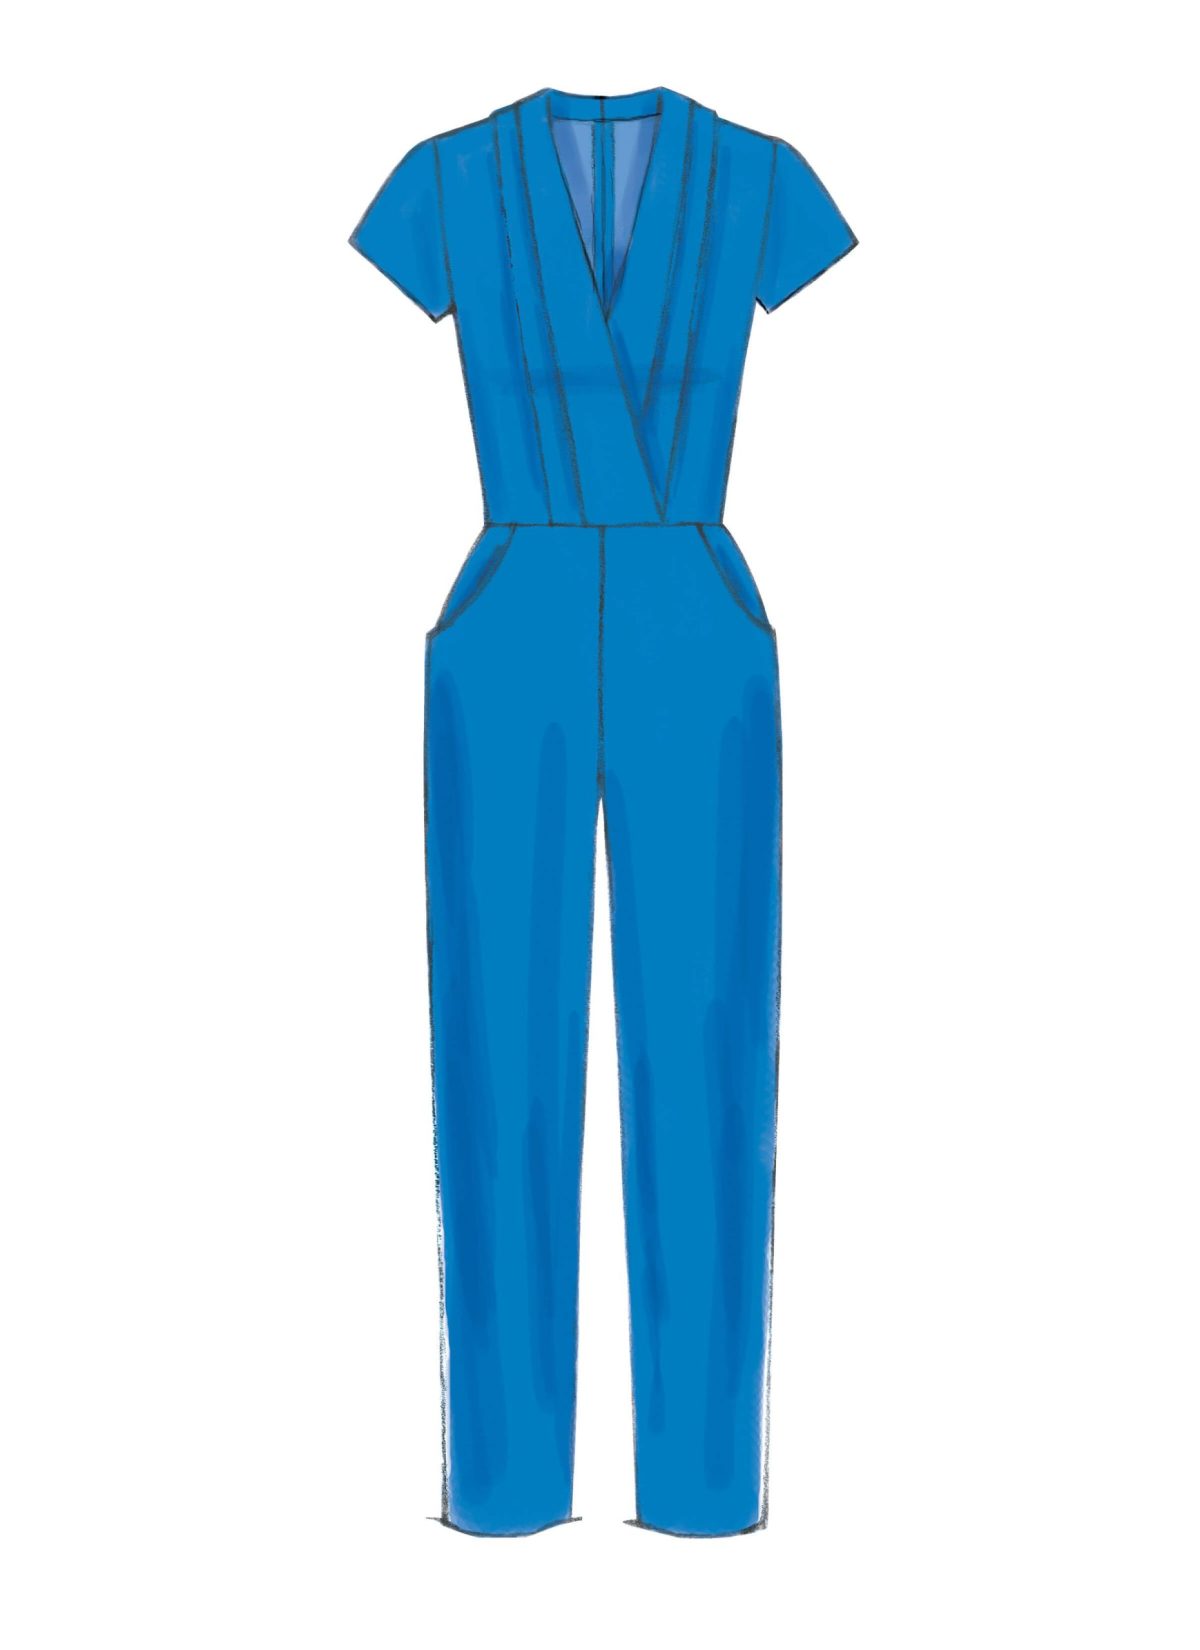 McCall's Sewing Pattern M7366 Misses' Pleated Surplice or Plunging-Neckline Rompers, Jumpsuits and Belt